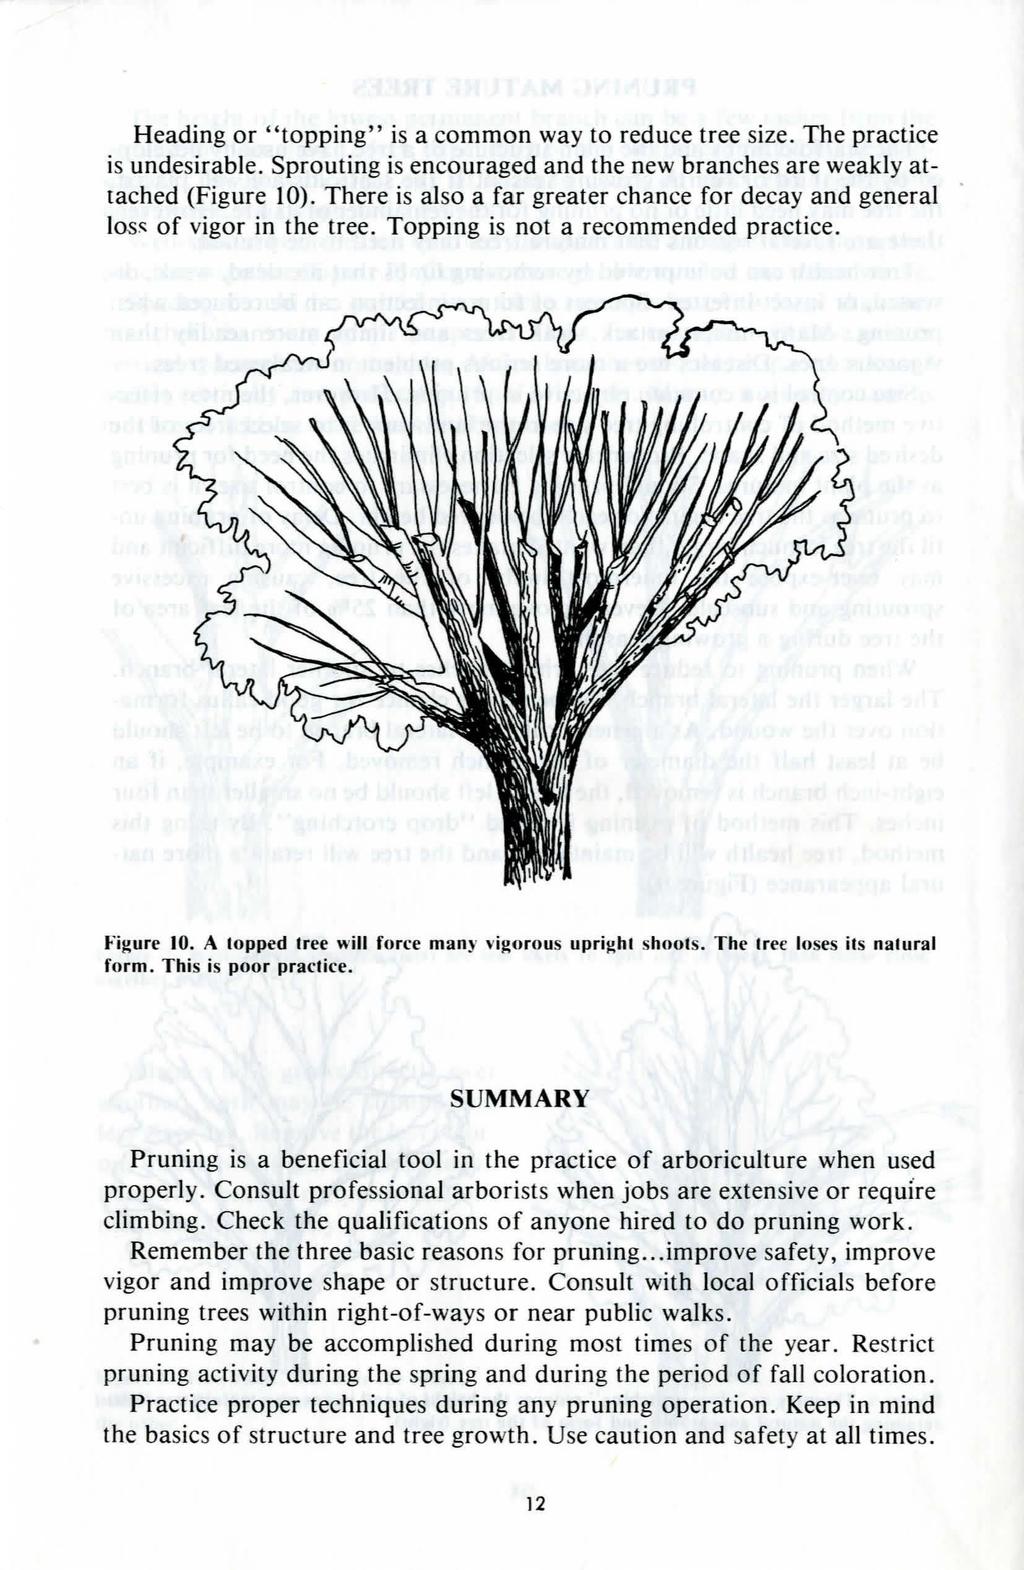 Heading or "topping" is a common way to reduce tree size. The practice is undesirable. Sprouting is encouraged and the new branches are weakly attached (Figure 10).